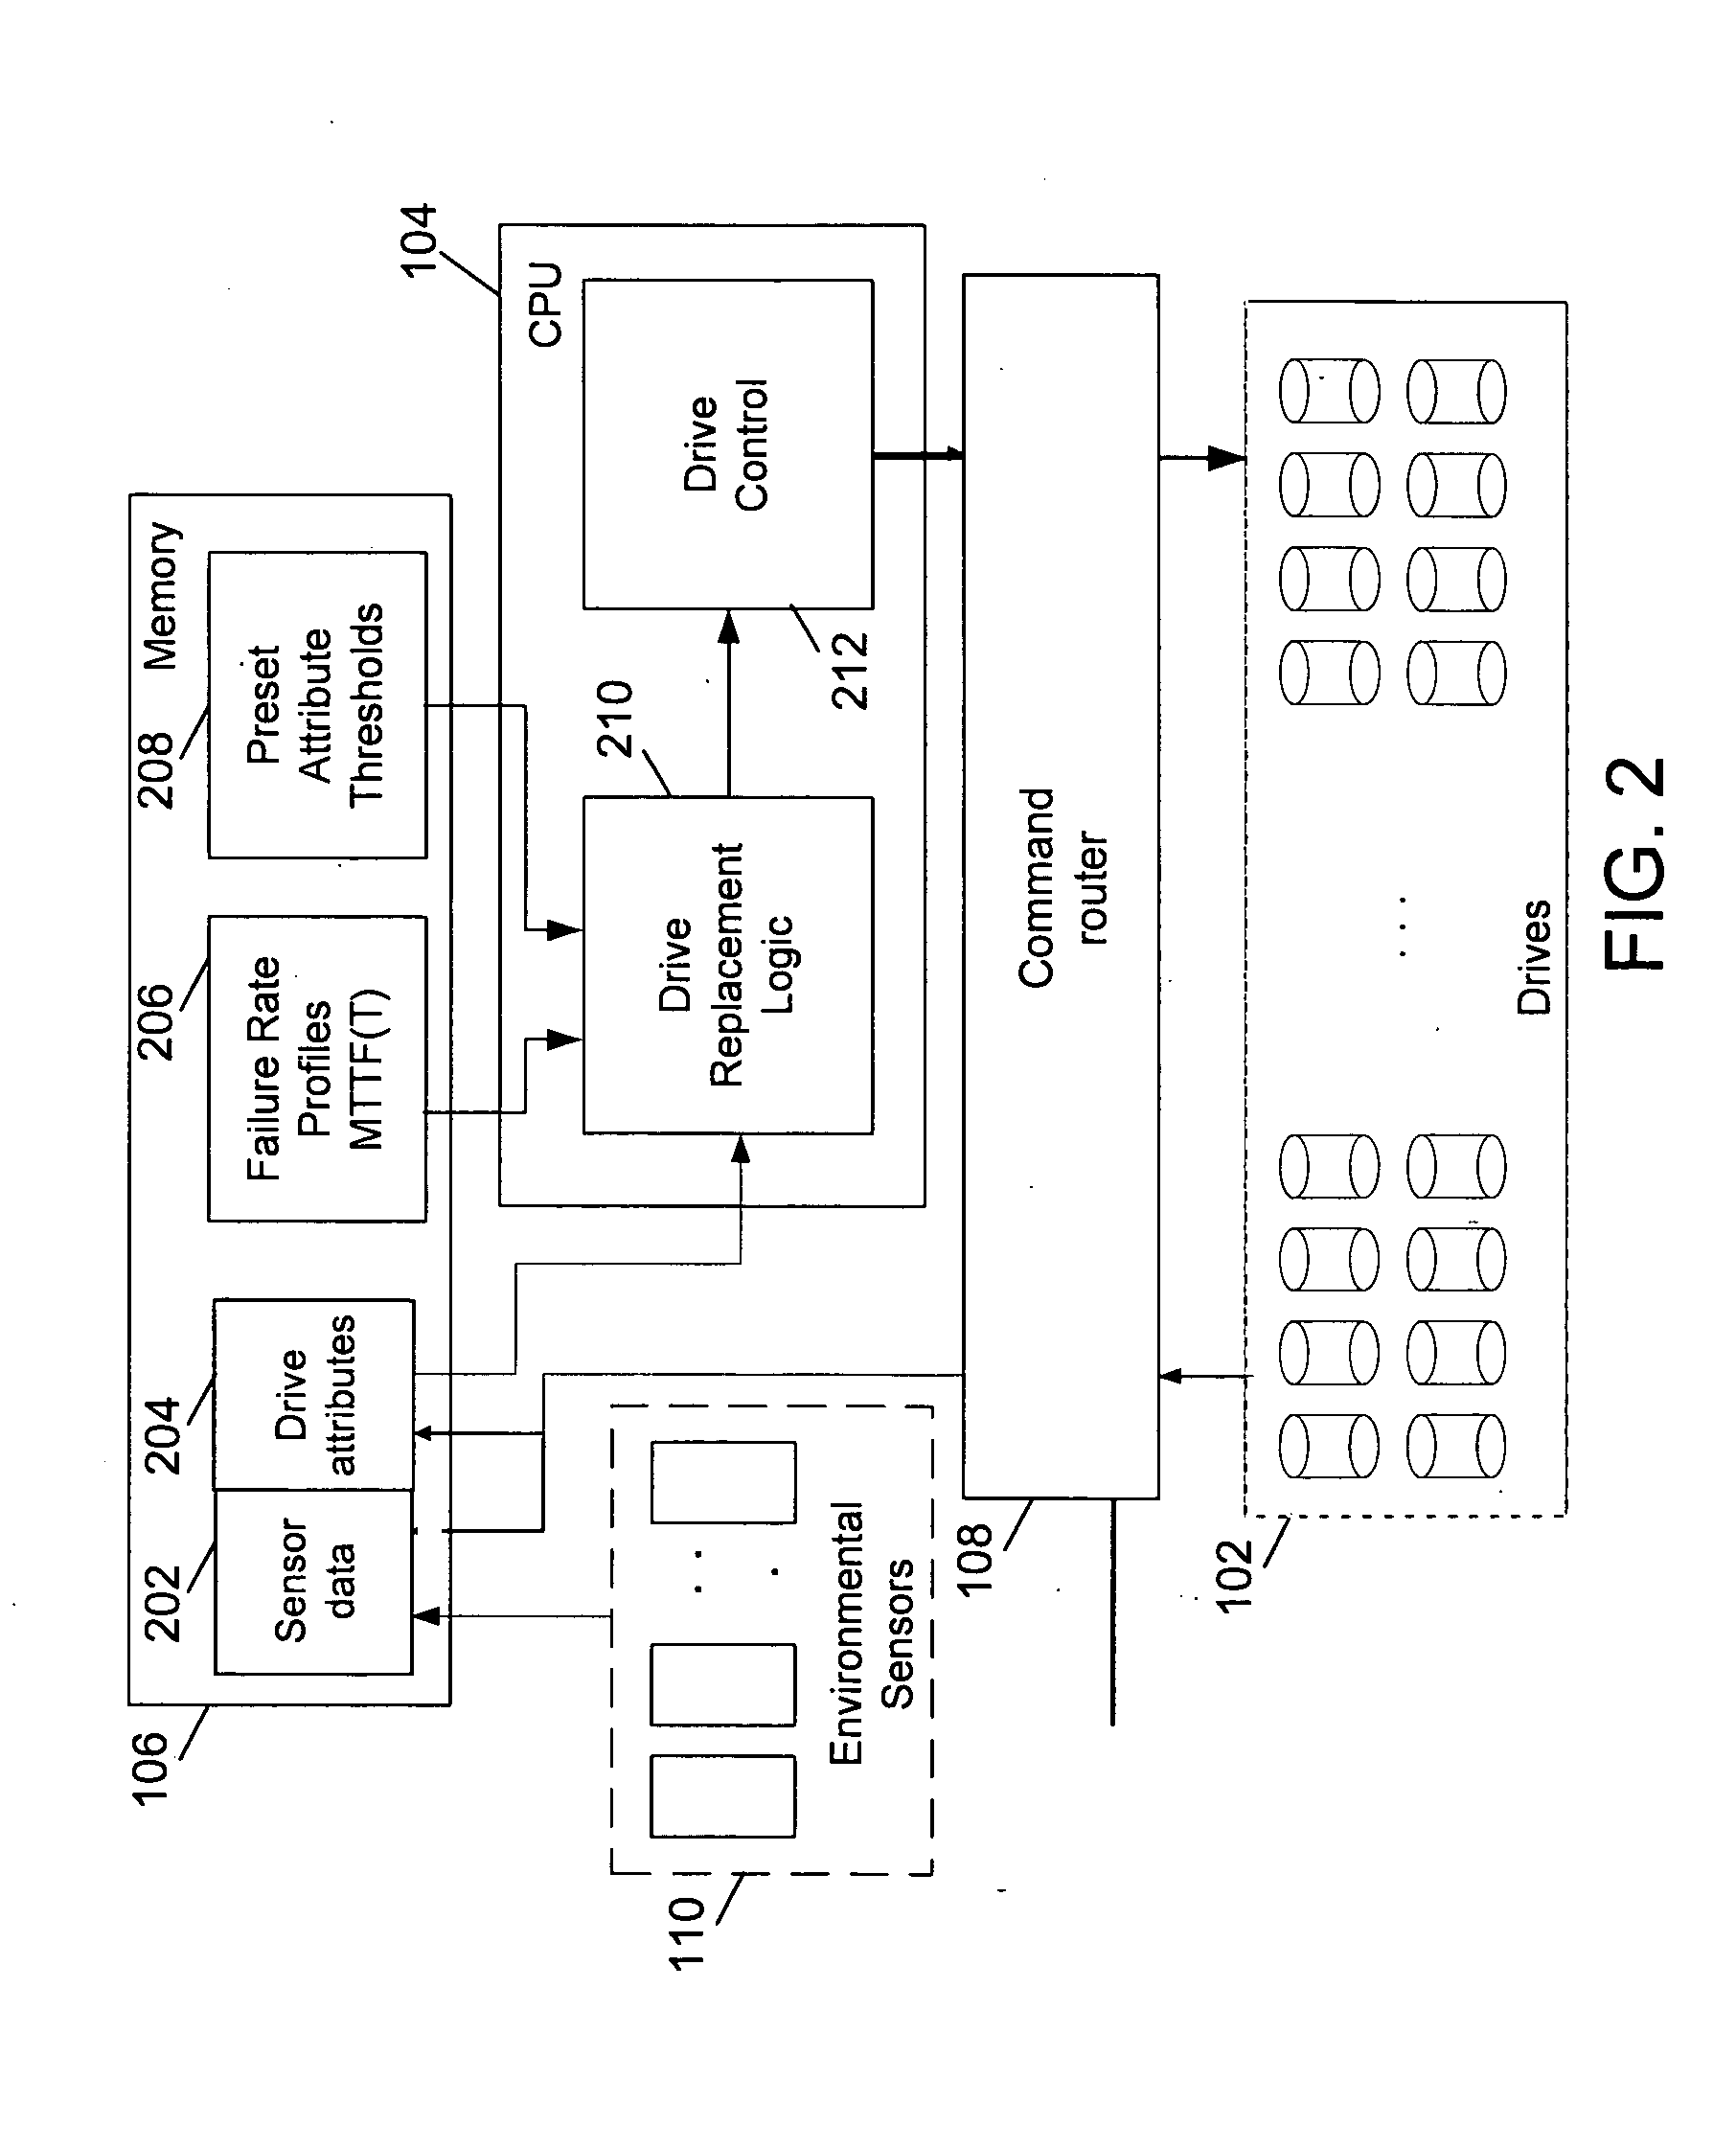 Method and system for proactive drive replacement for high availability storage systems